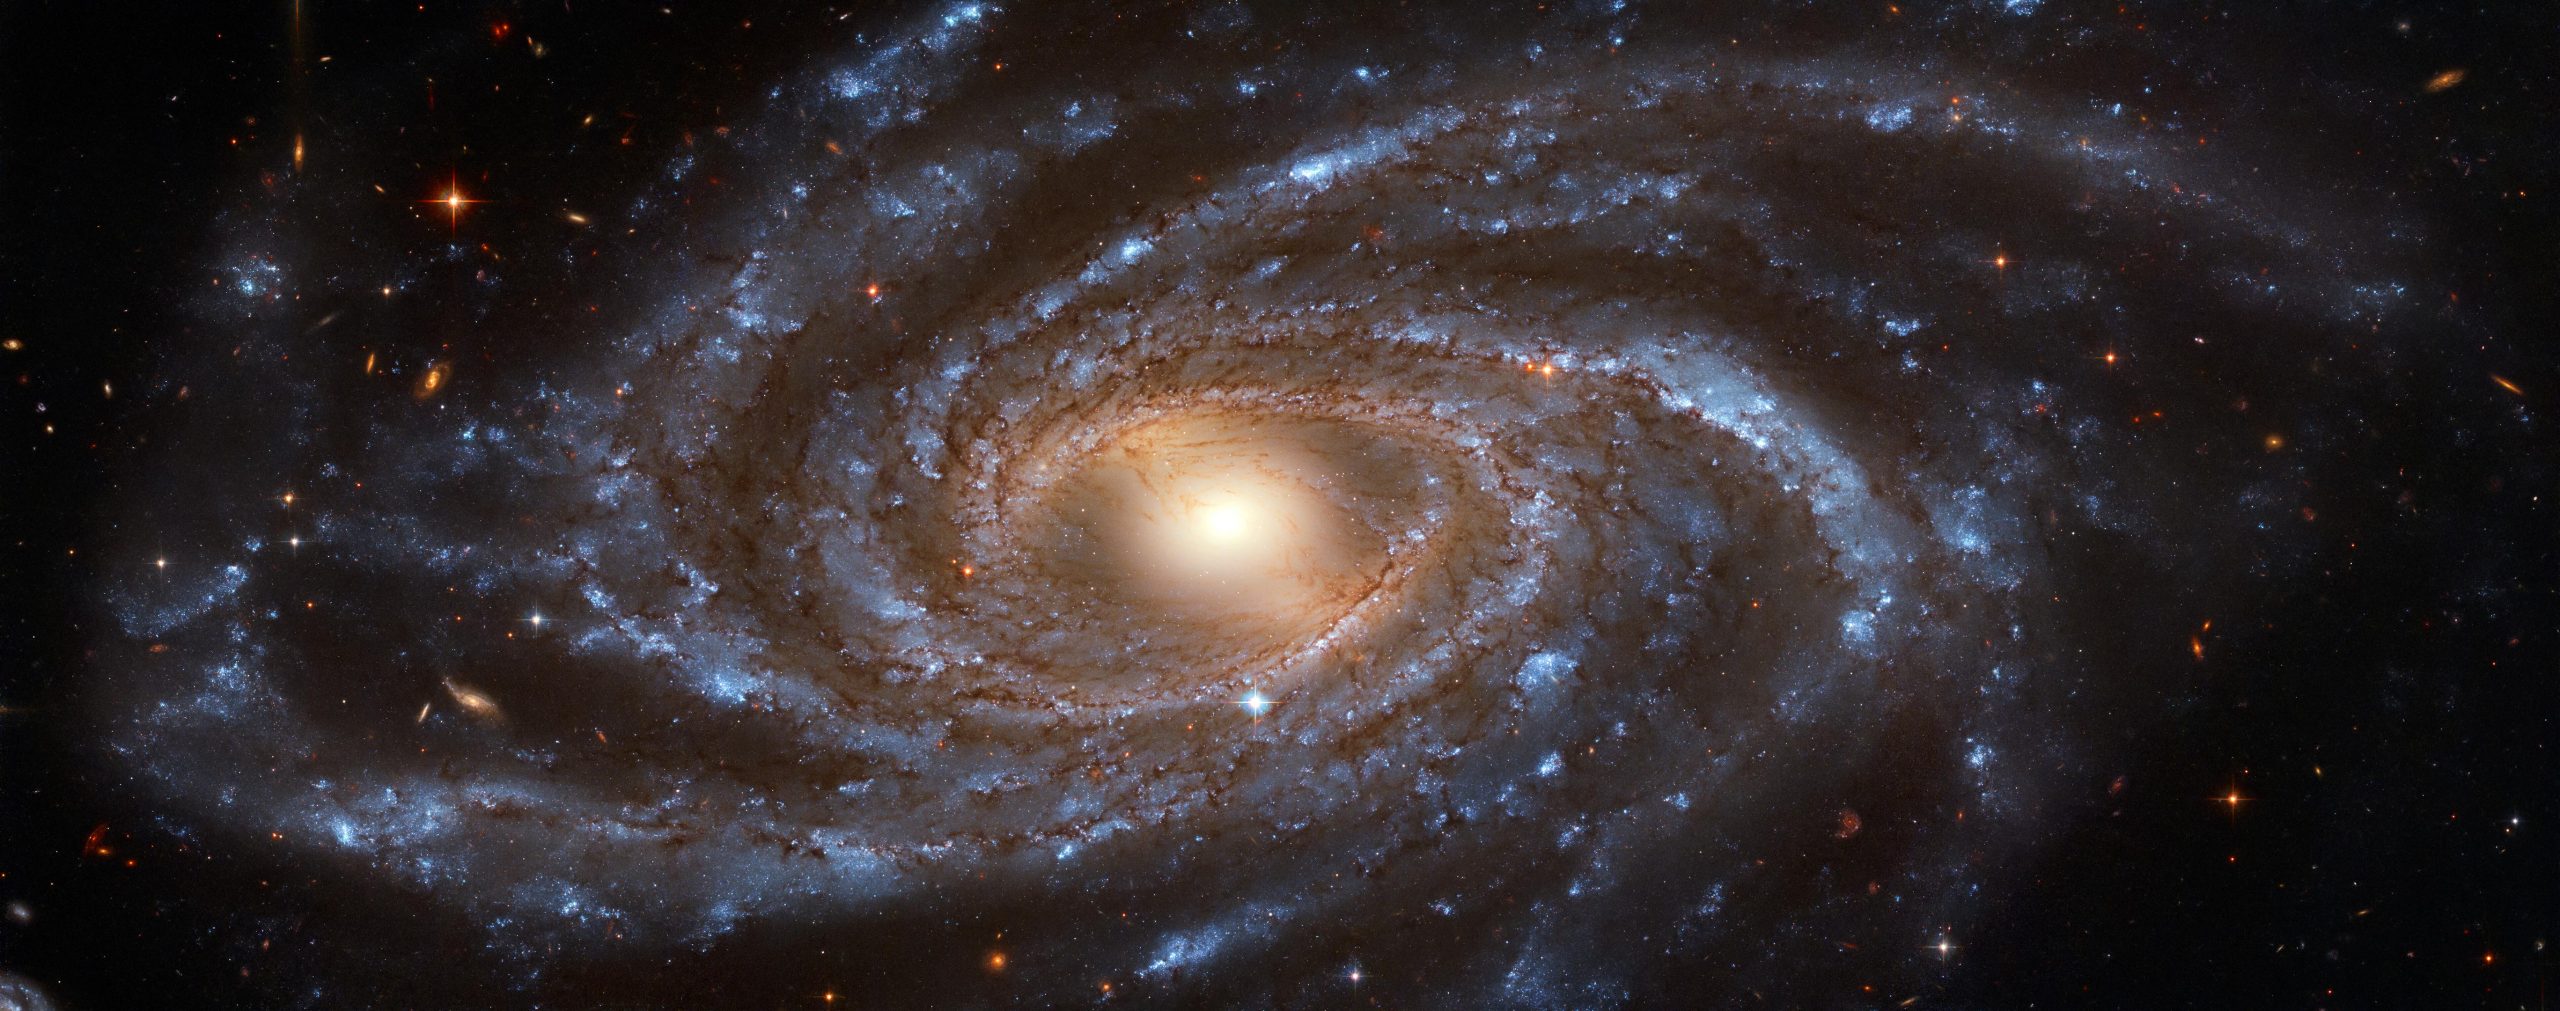 Hubble captures an enormous galaxy spanning 200,000 light-years across